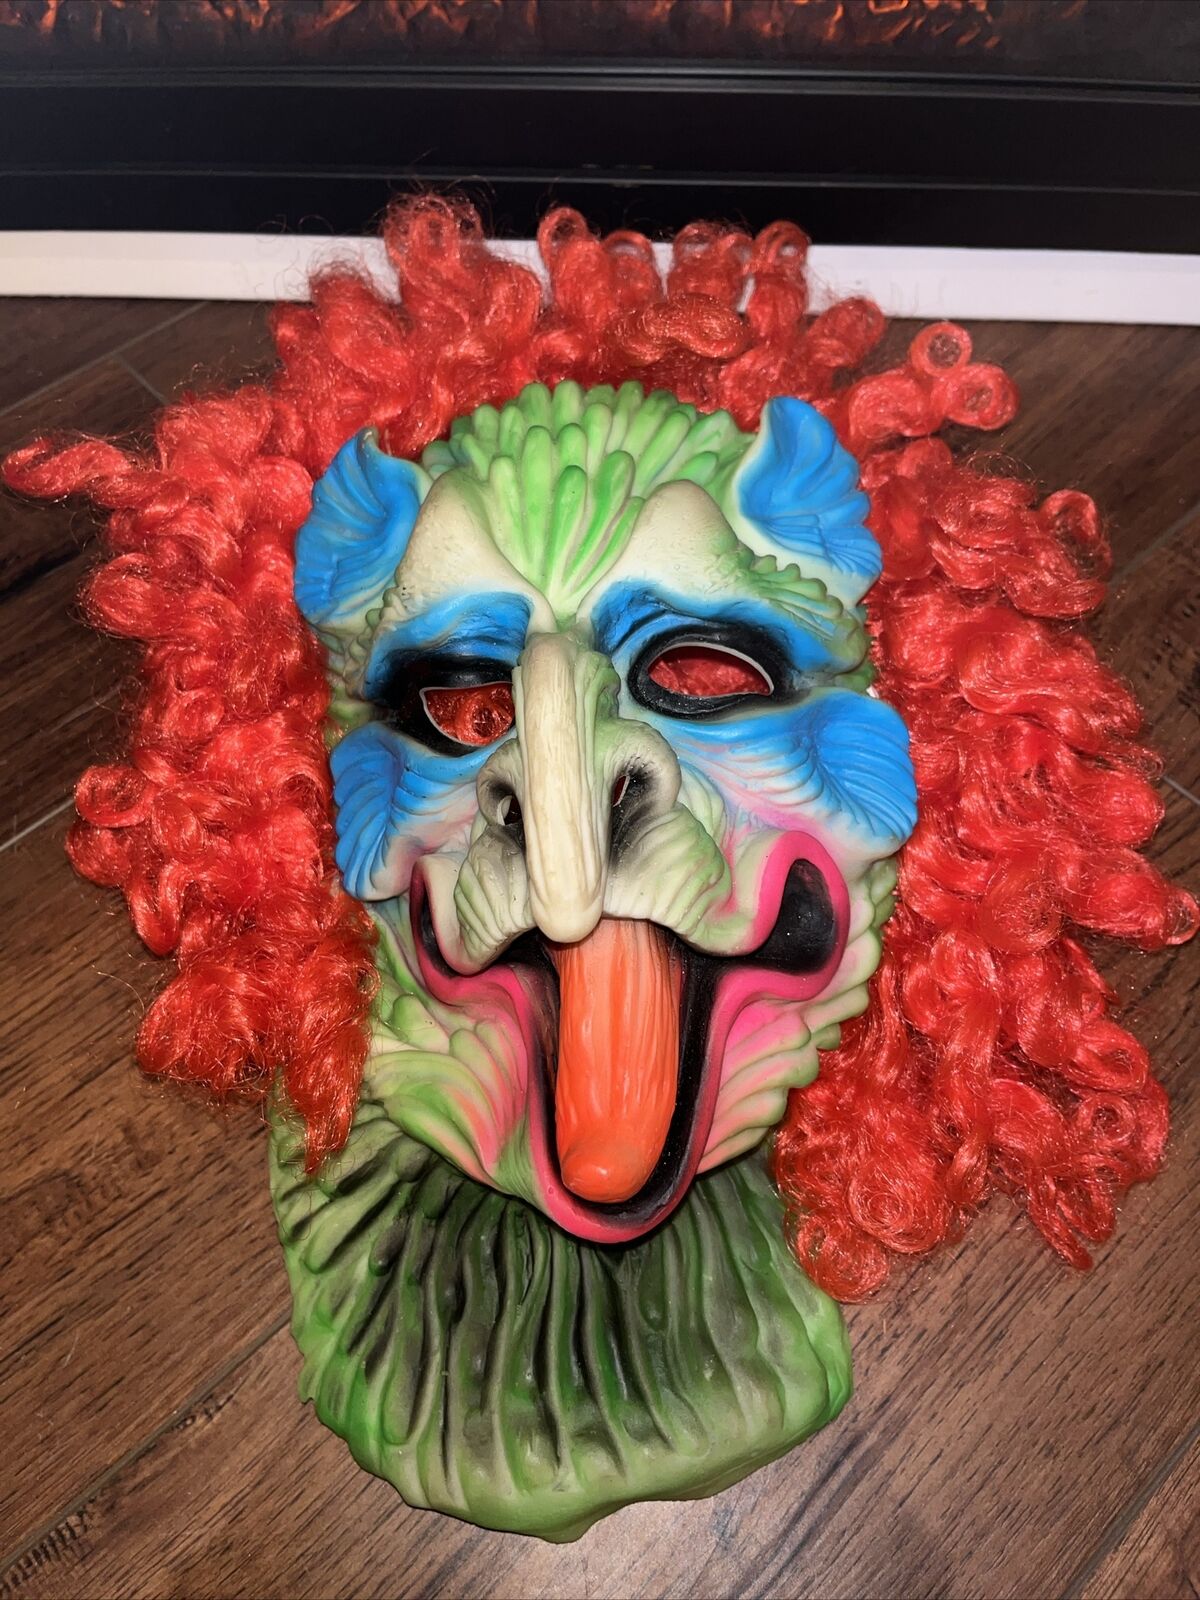 Vintage 1970s/80s Fun World Black Light Halloween Rubber Mask Sea Witch Monster